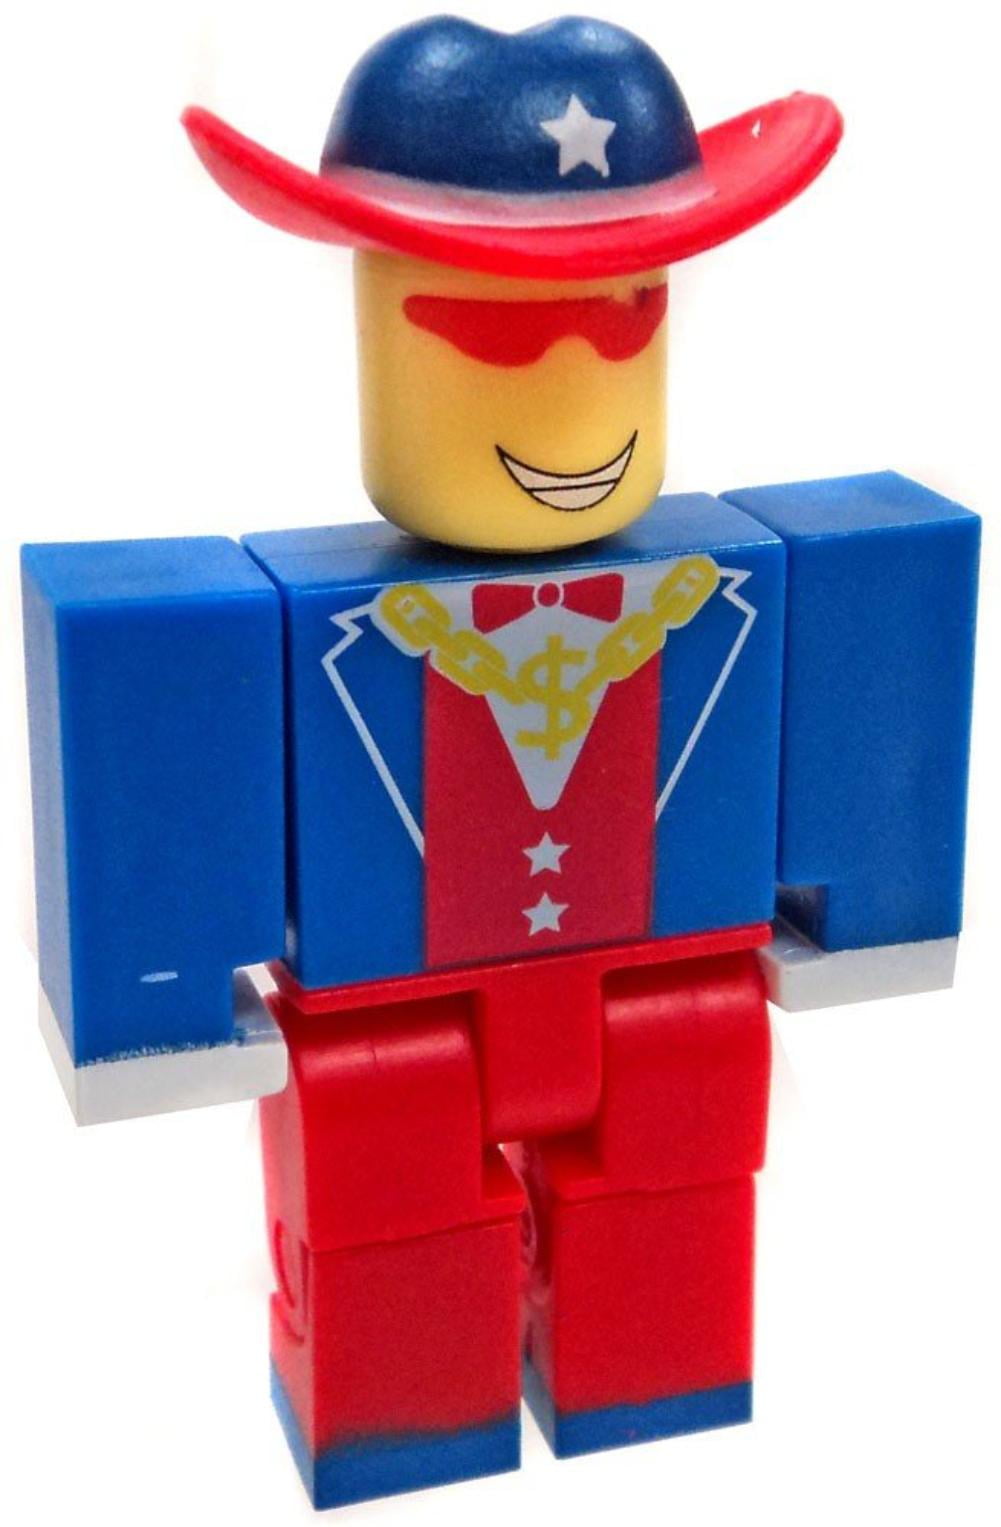 Series 2 Uncle Sam S Uncle Action Figure Mystery Box Virtual Item Code 2 5 Figure Comes As Pictured With Online Code By Roblox Walmart Com Walmart Com - action figures toys 2 styles roblox virtual world roblox building block doll with accessories two color box packaging bag legoes legobricks from